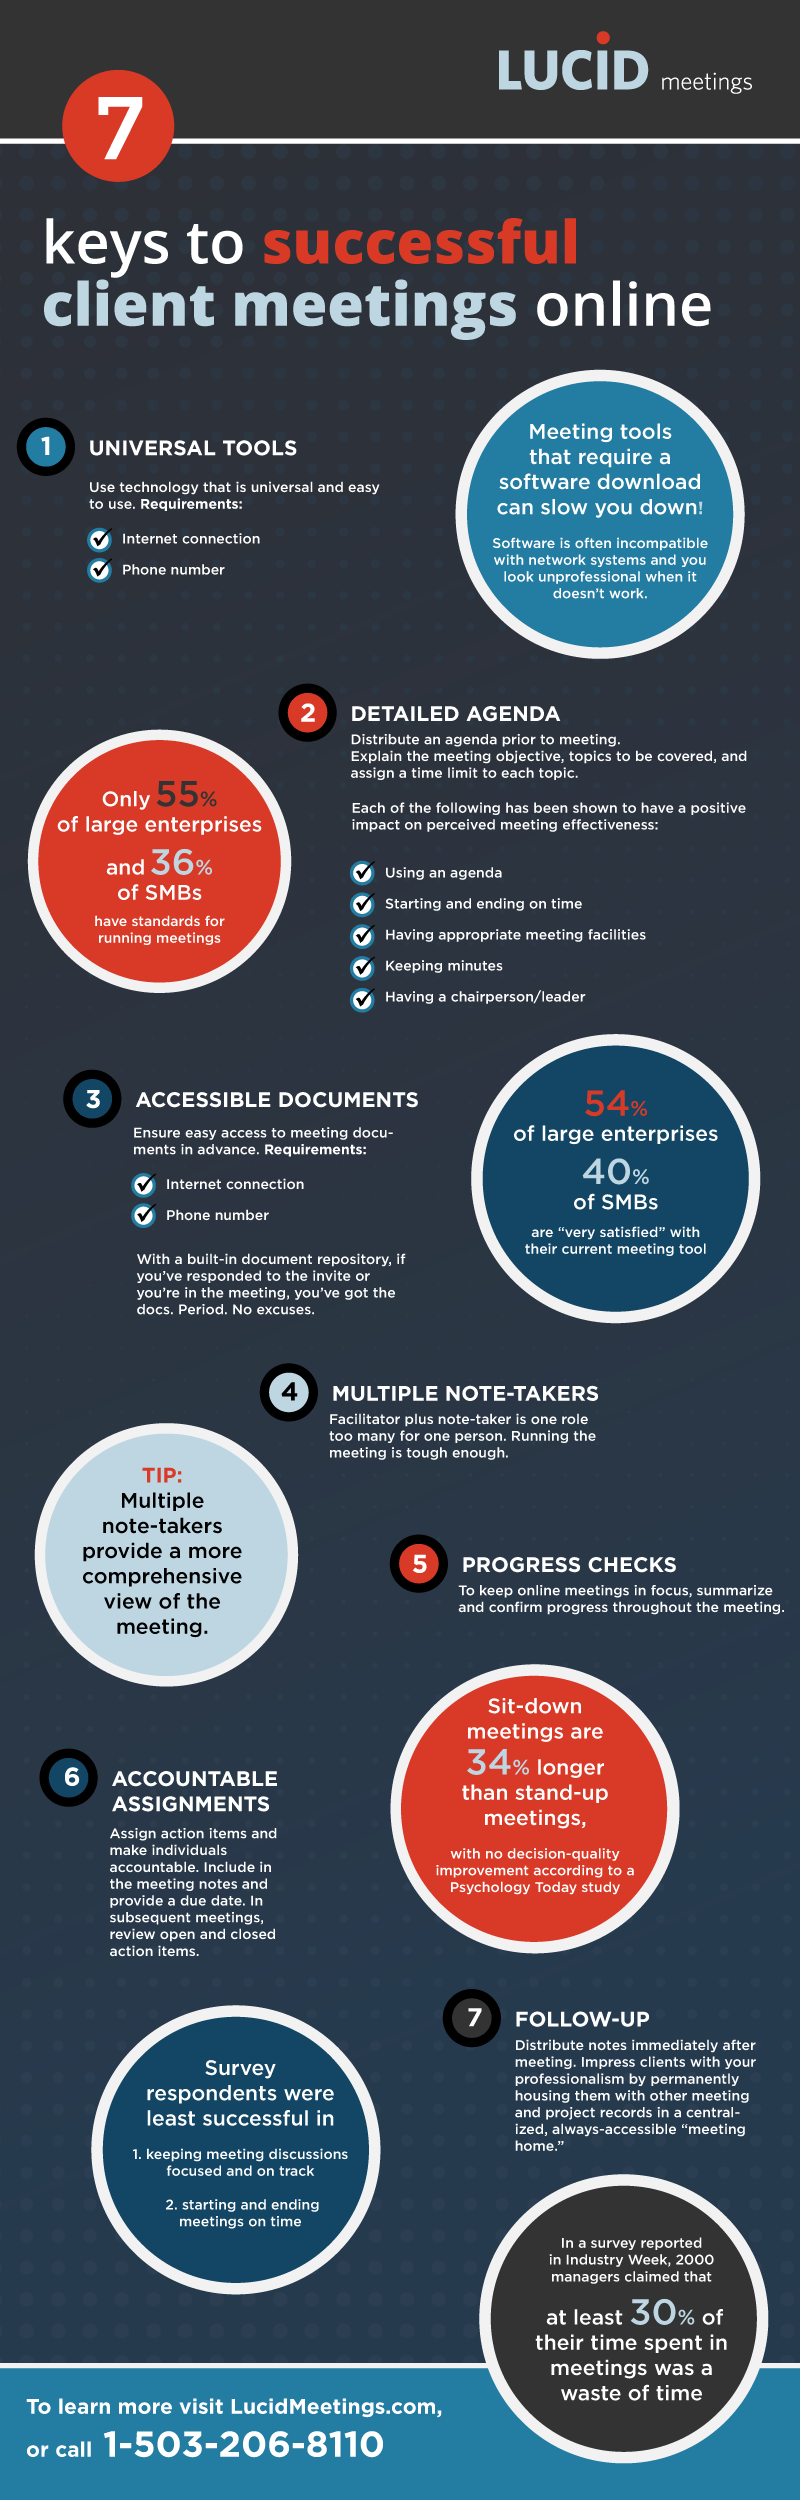 Infographic: 7 keys to successful client meetings online. 1. Universal tools, 2. Detailed agenda, 3. Accessible documents, 4. Multiple note-takers, 5. Progress checks, 6. Accountable assignments, 7. Follow-up